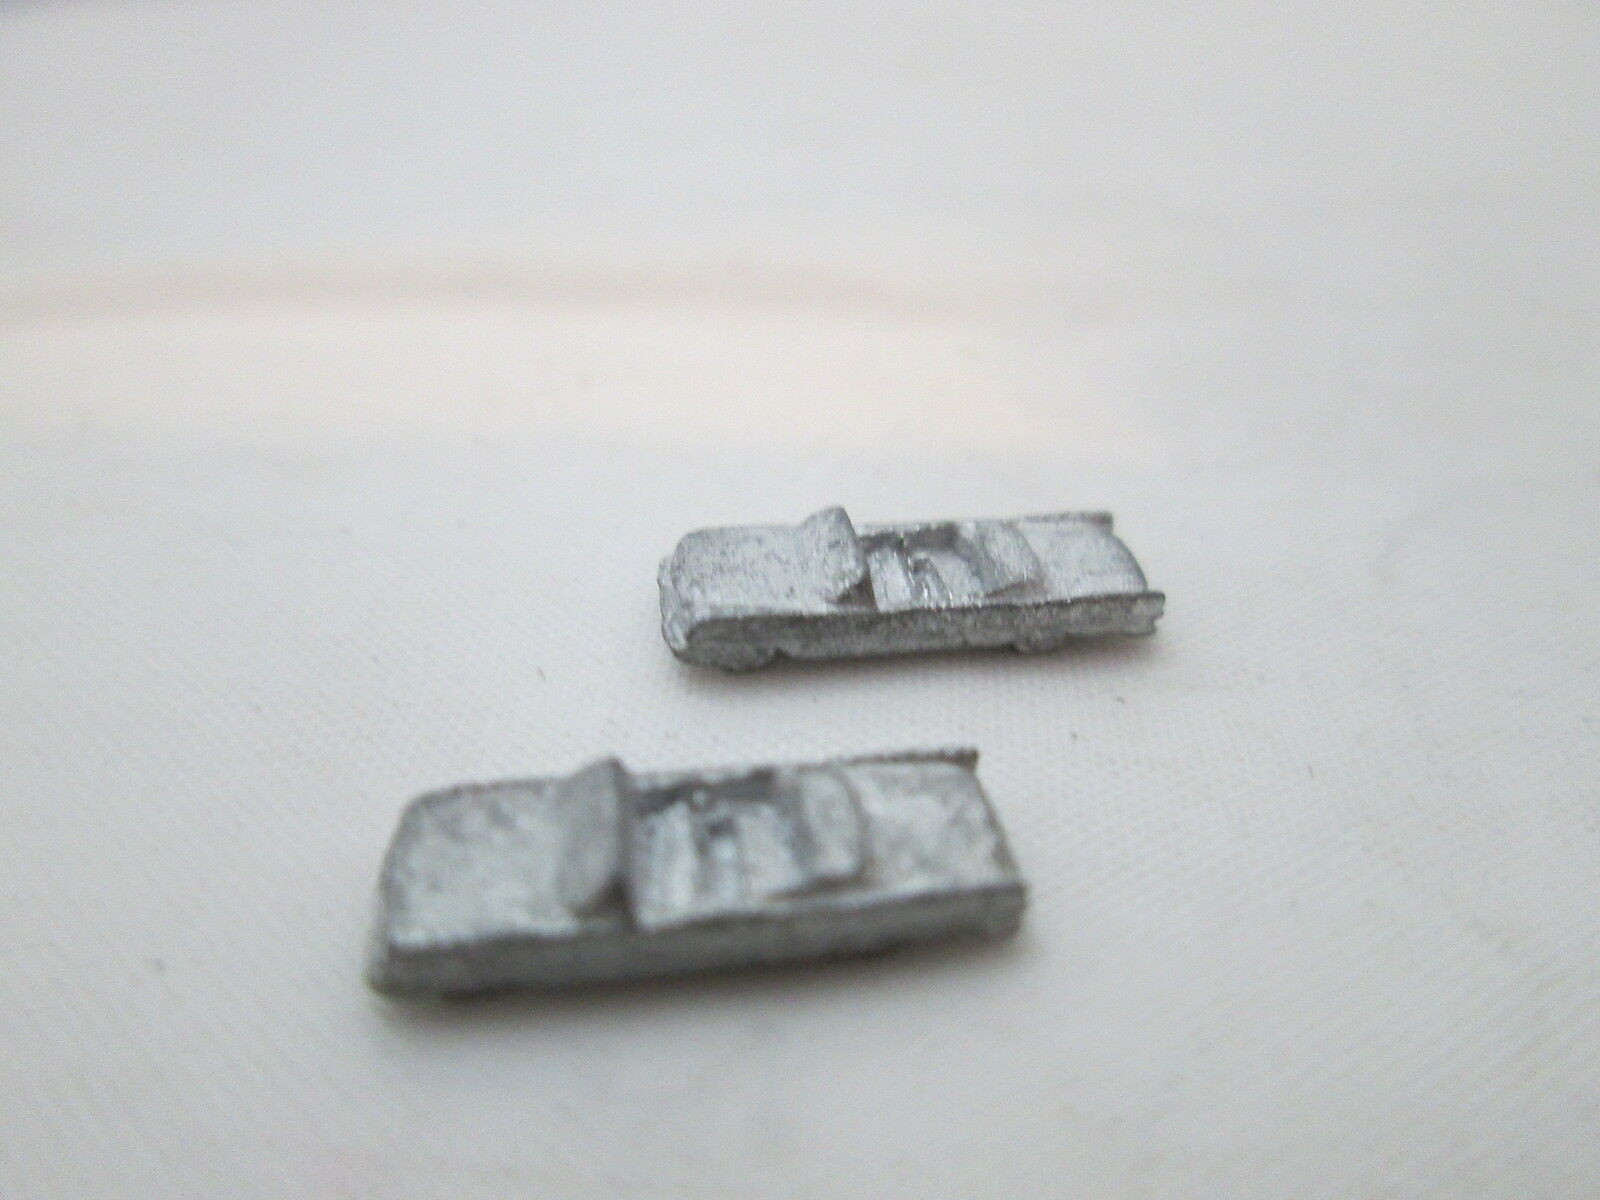 2 Dollhouse Miniature Unfinished Metal Tiny Toy Convertible Car #2